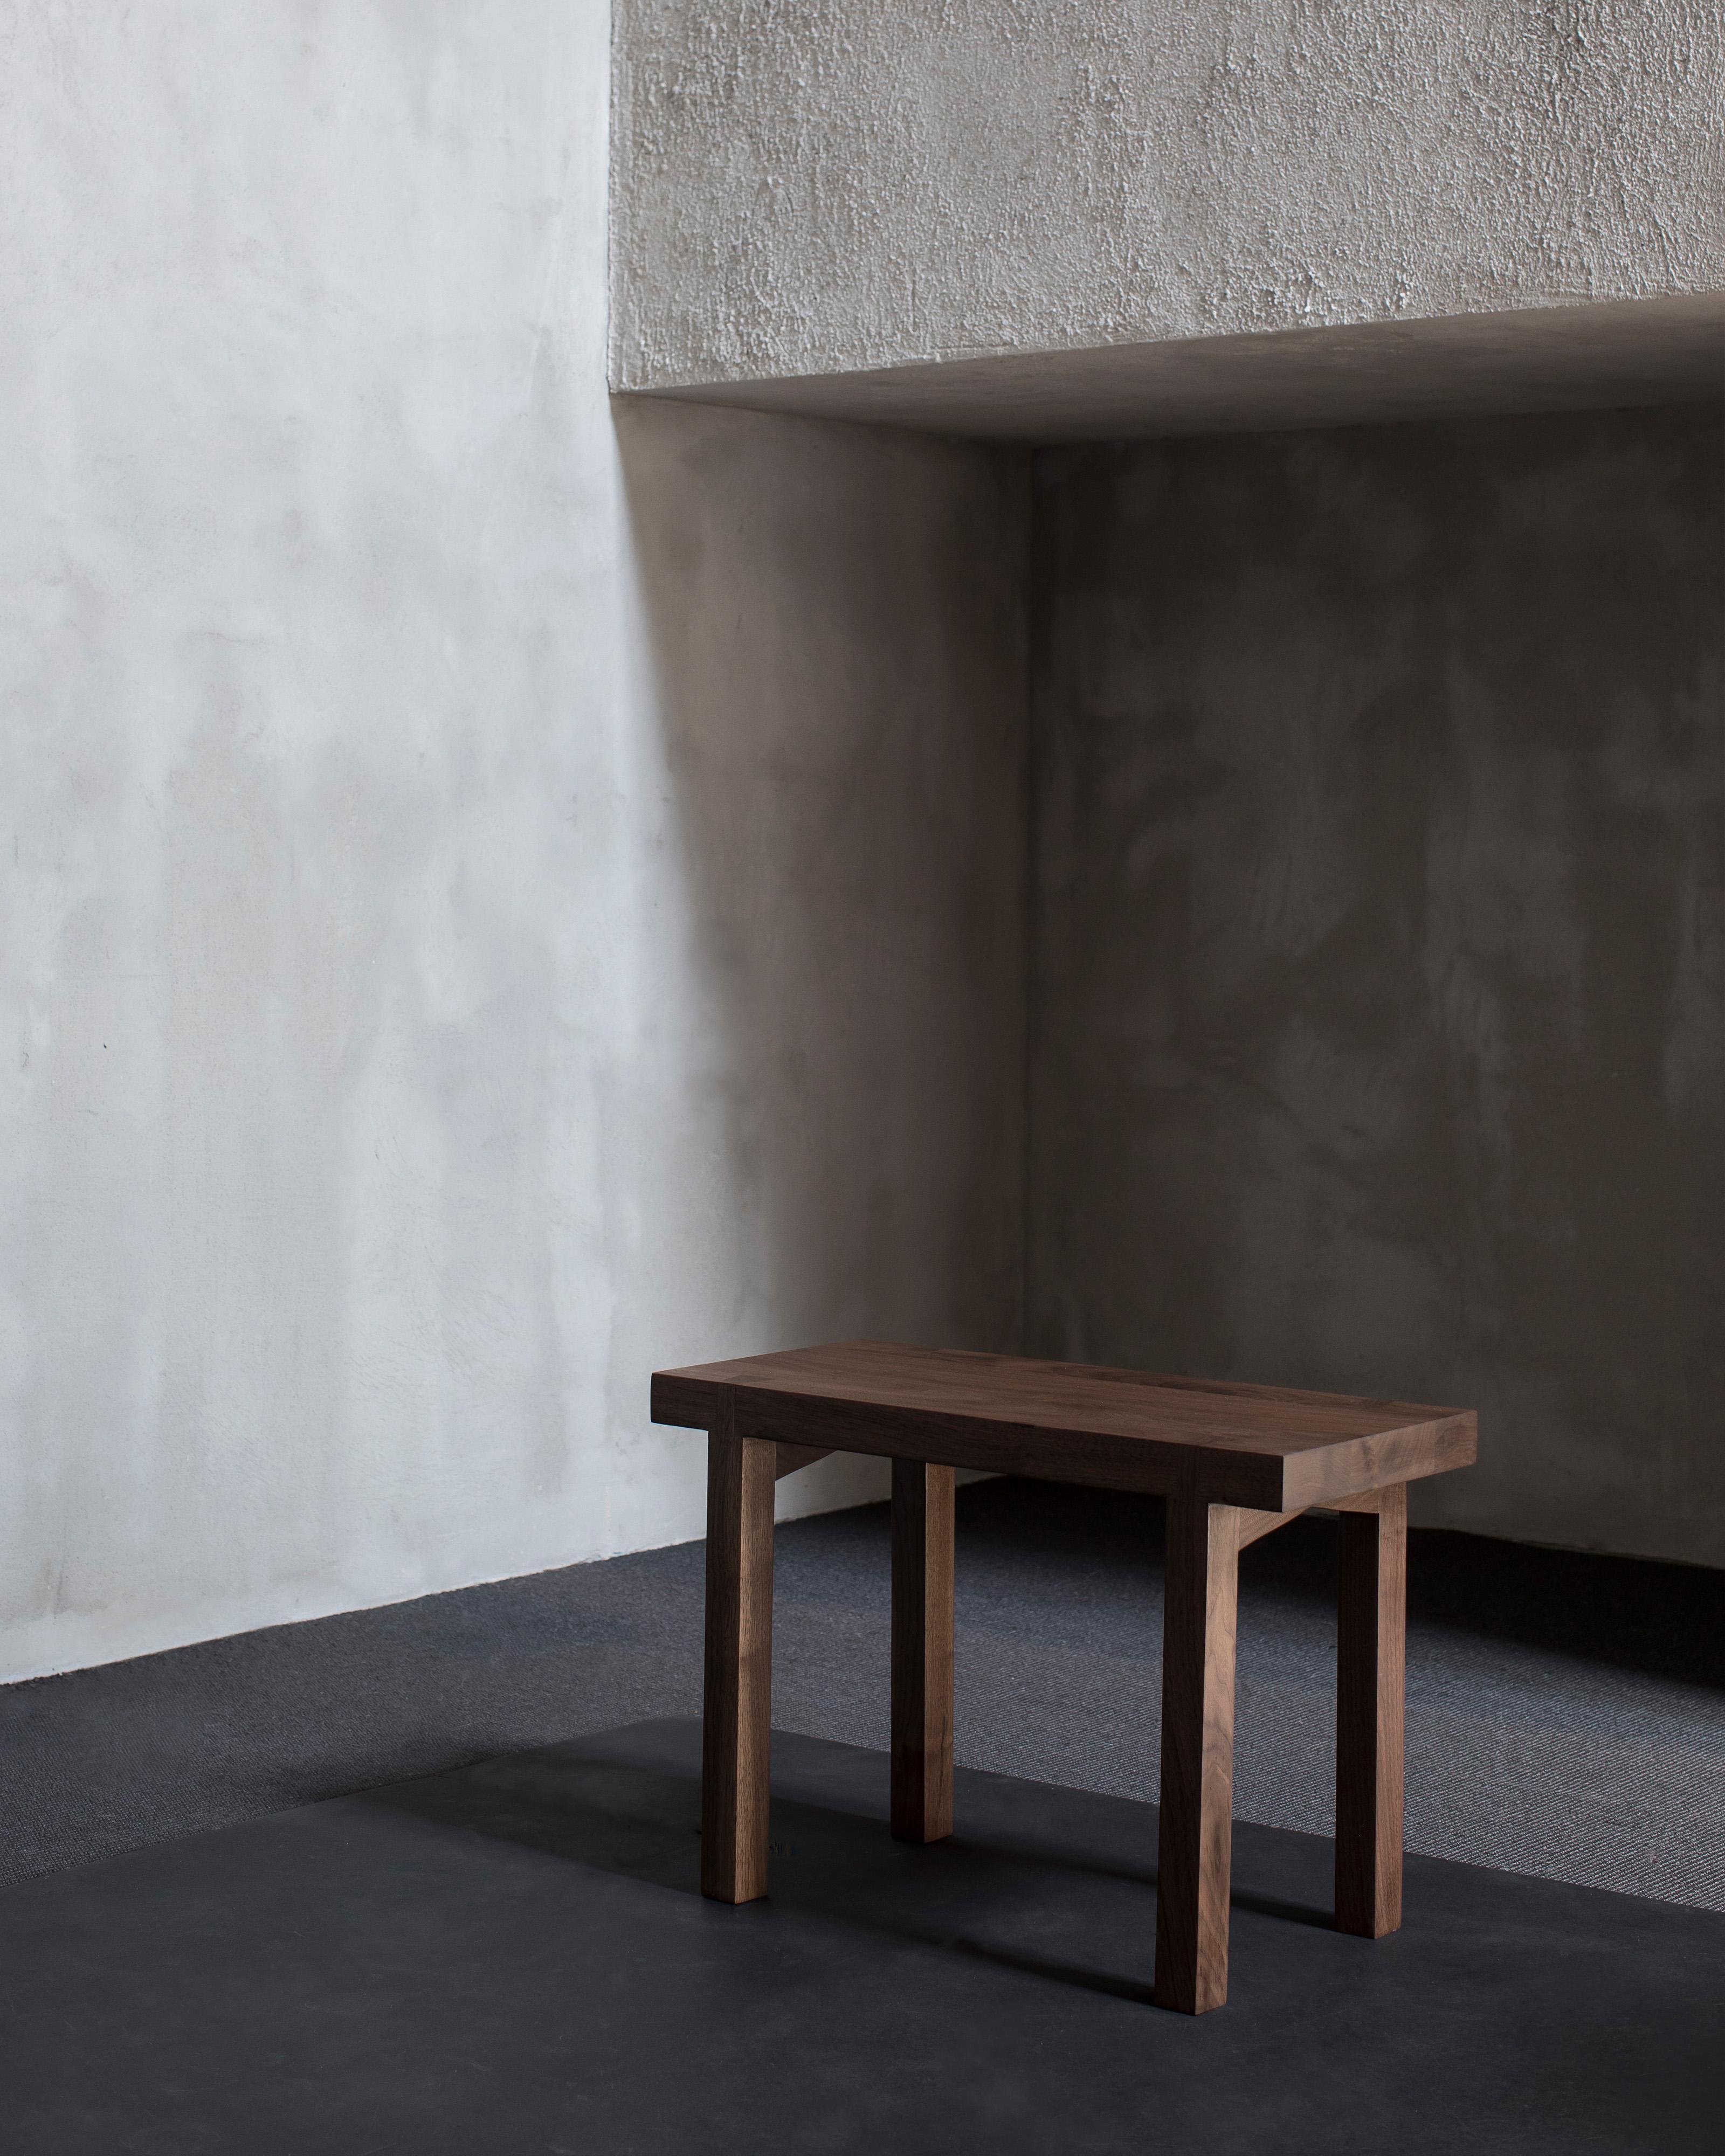 Bench in Walnut 'Solid' by Atelier 365 x Valerie Objects
Dimensions: H. 45 x W. 65 D. 35 (Small)

Fascinated by traditional wood joints, Greindl constructs wooden furniture without any nails or screws. Every joint is cut by hand, using chisels and a